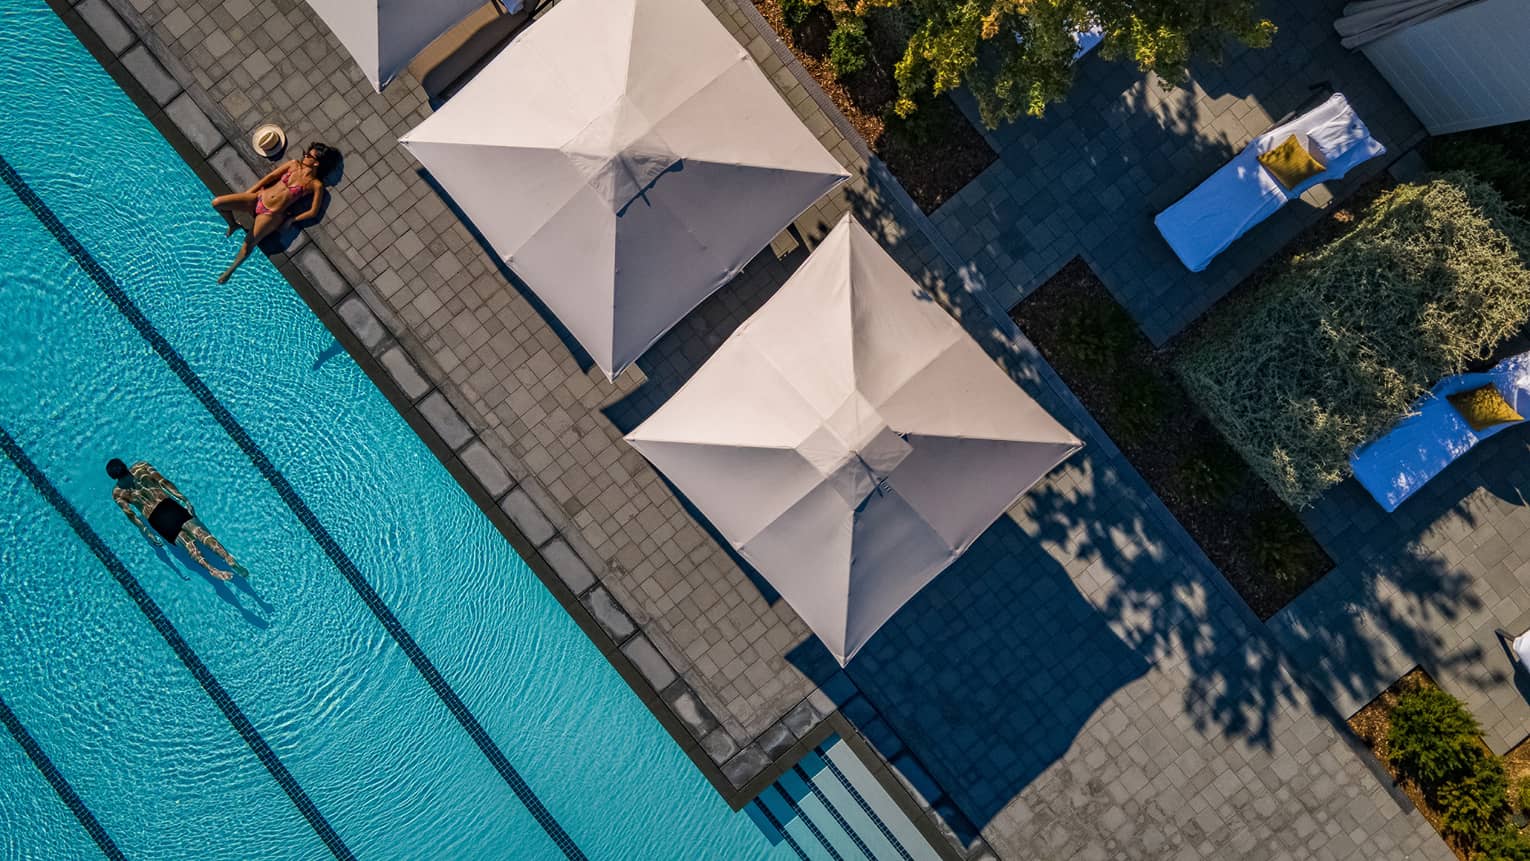 Aerial view of the pool and cabanas, with one person swimming and the other laying on the side of the pool.